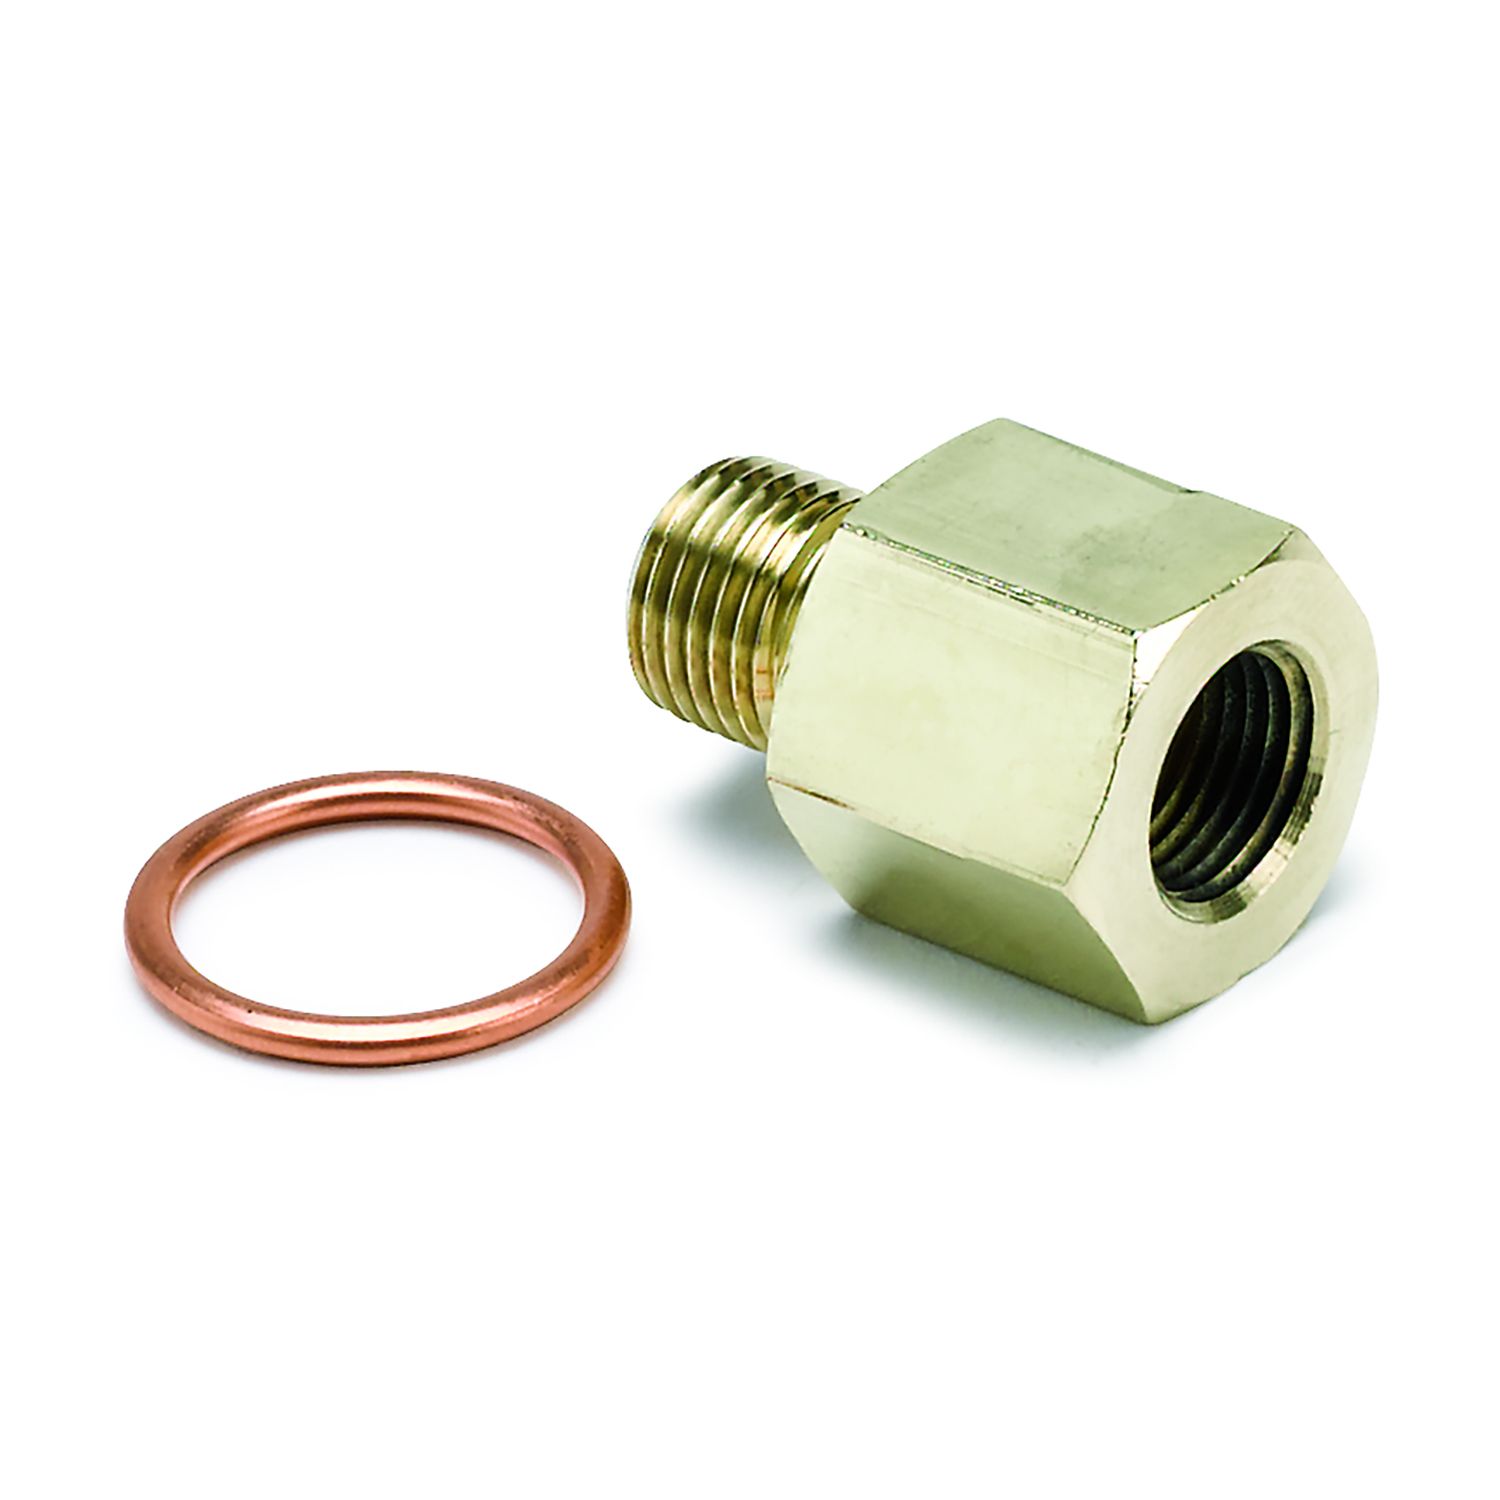 FITTING, ADAPTER, METRIC, M10X1 MALE TO 1/8 NPTF FEMALE, BRASS